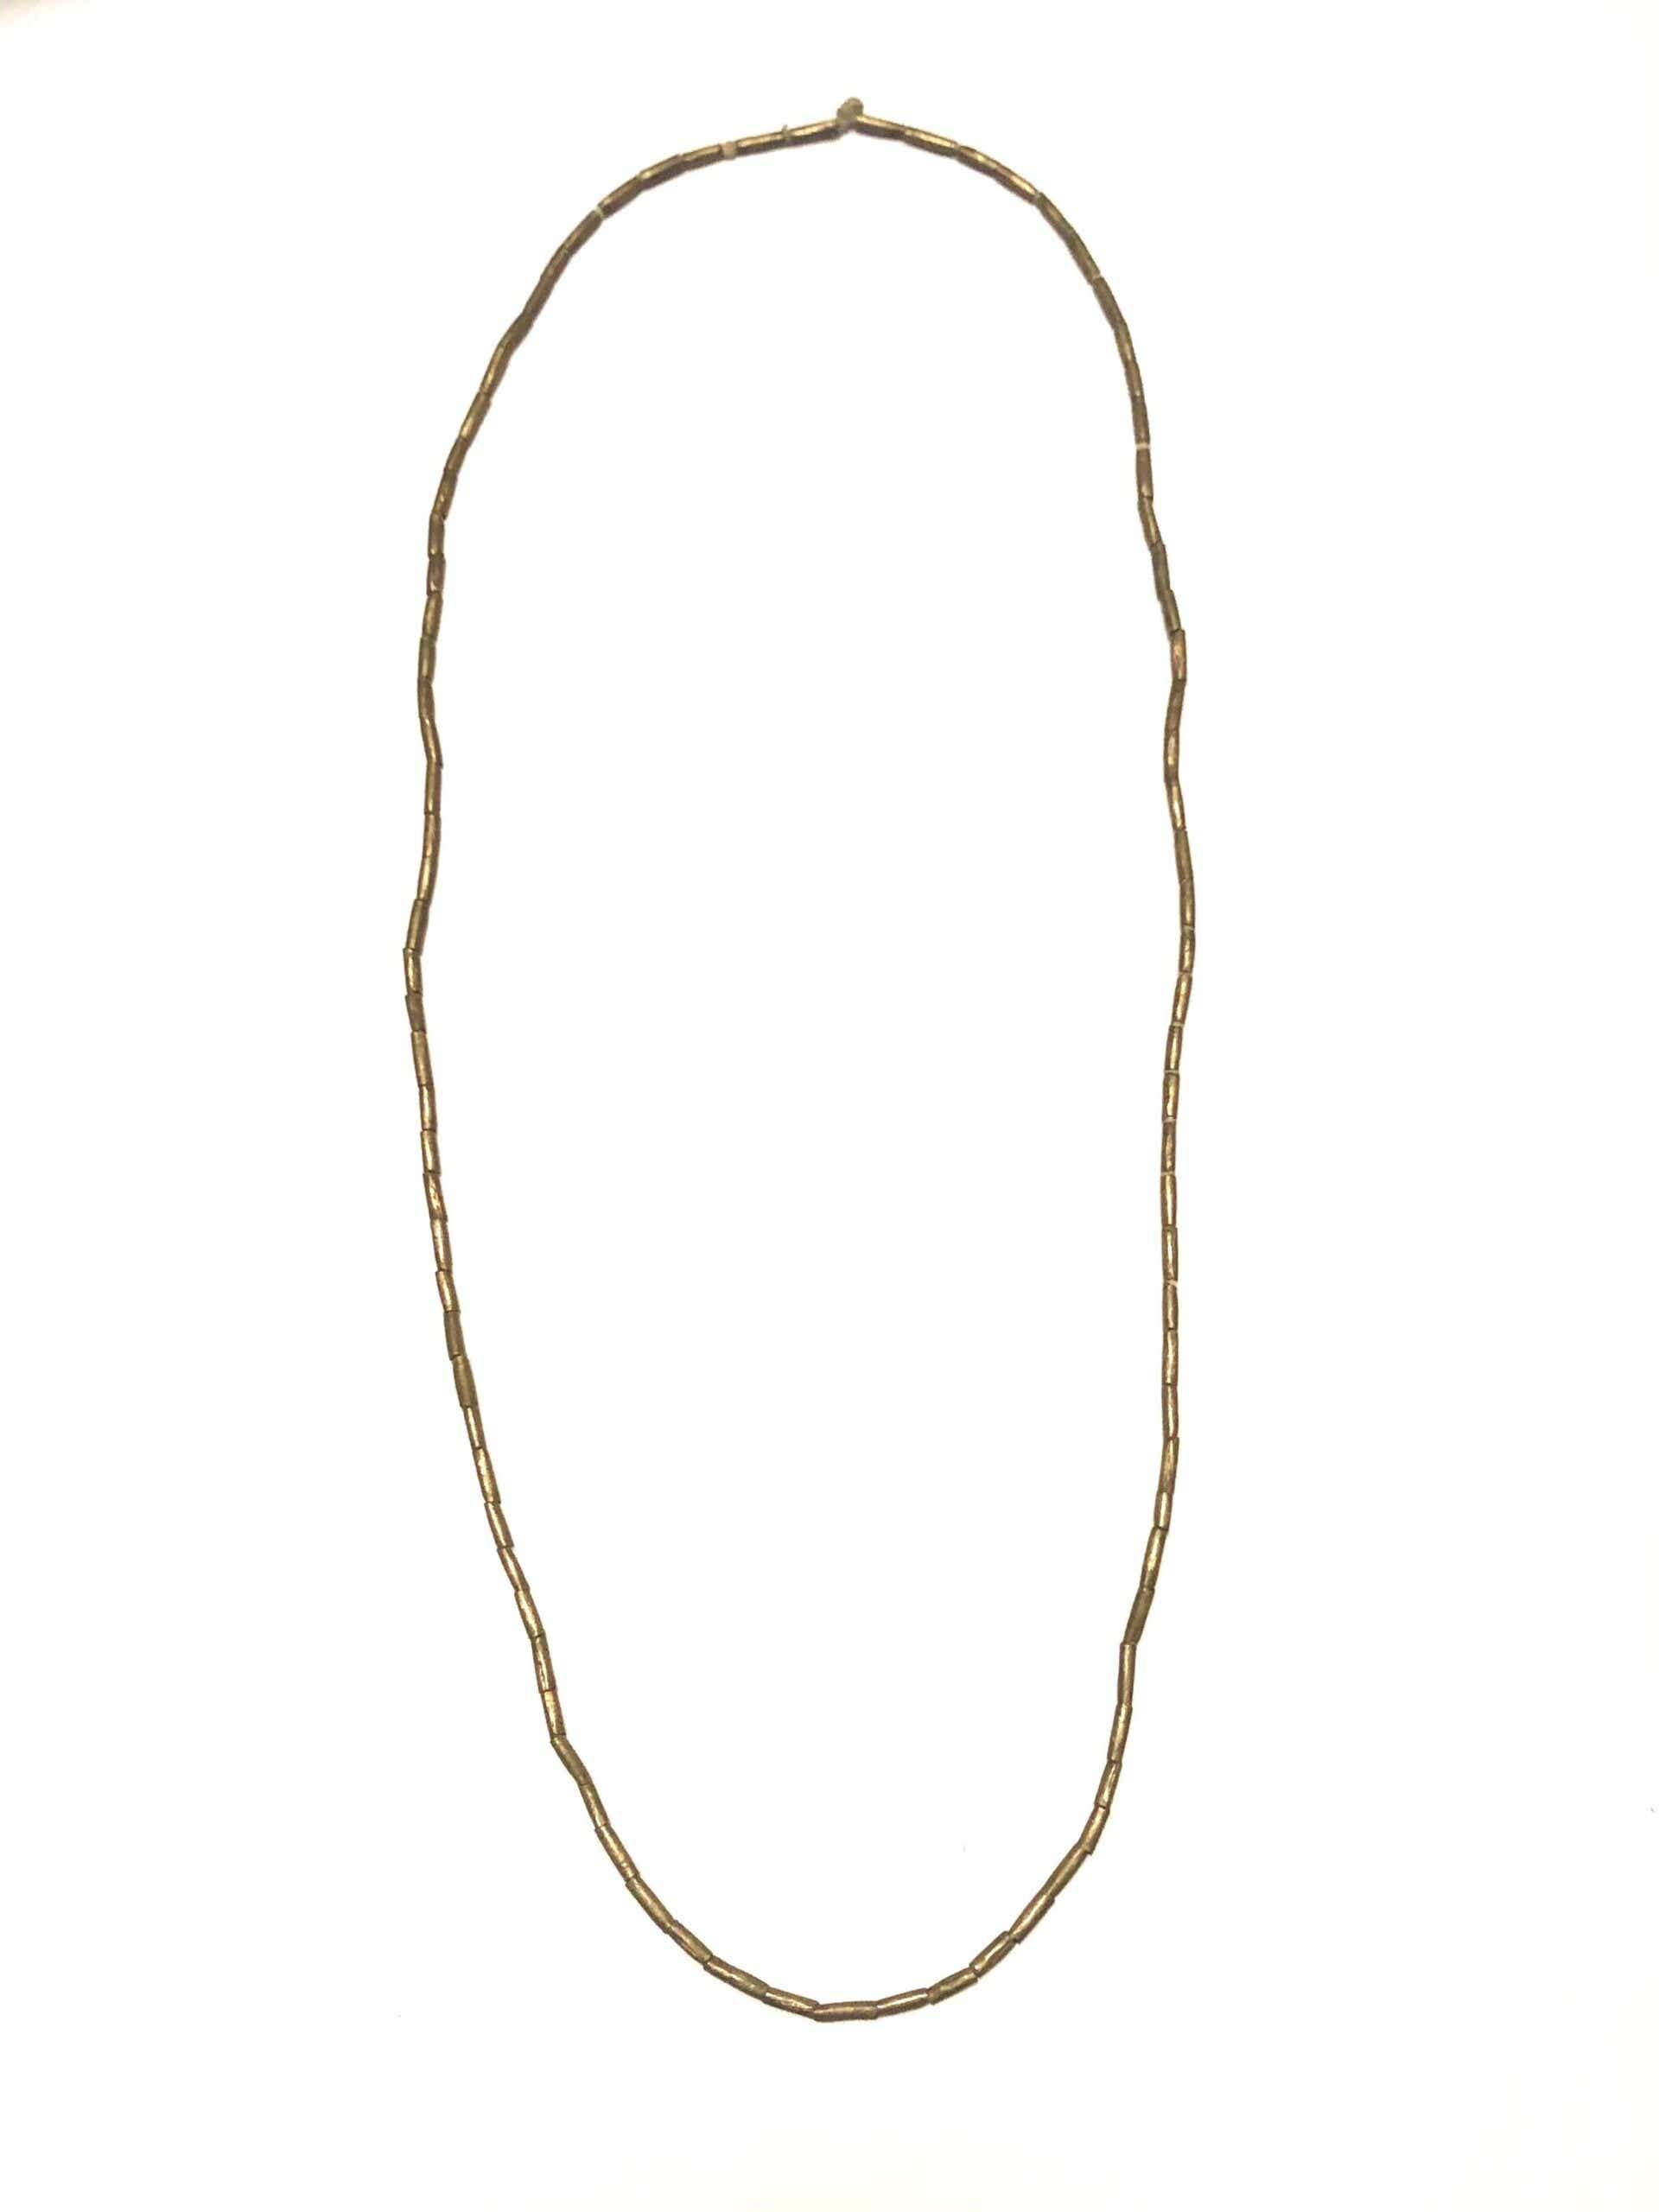 brass beaded necklace on white background